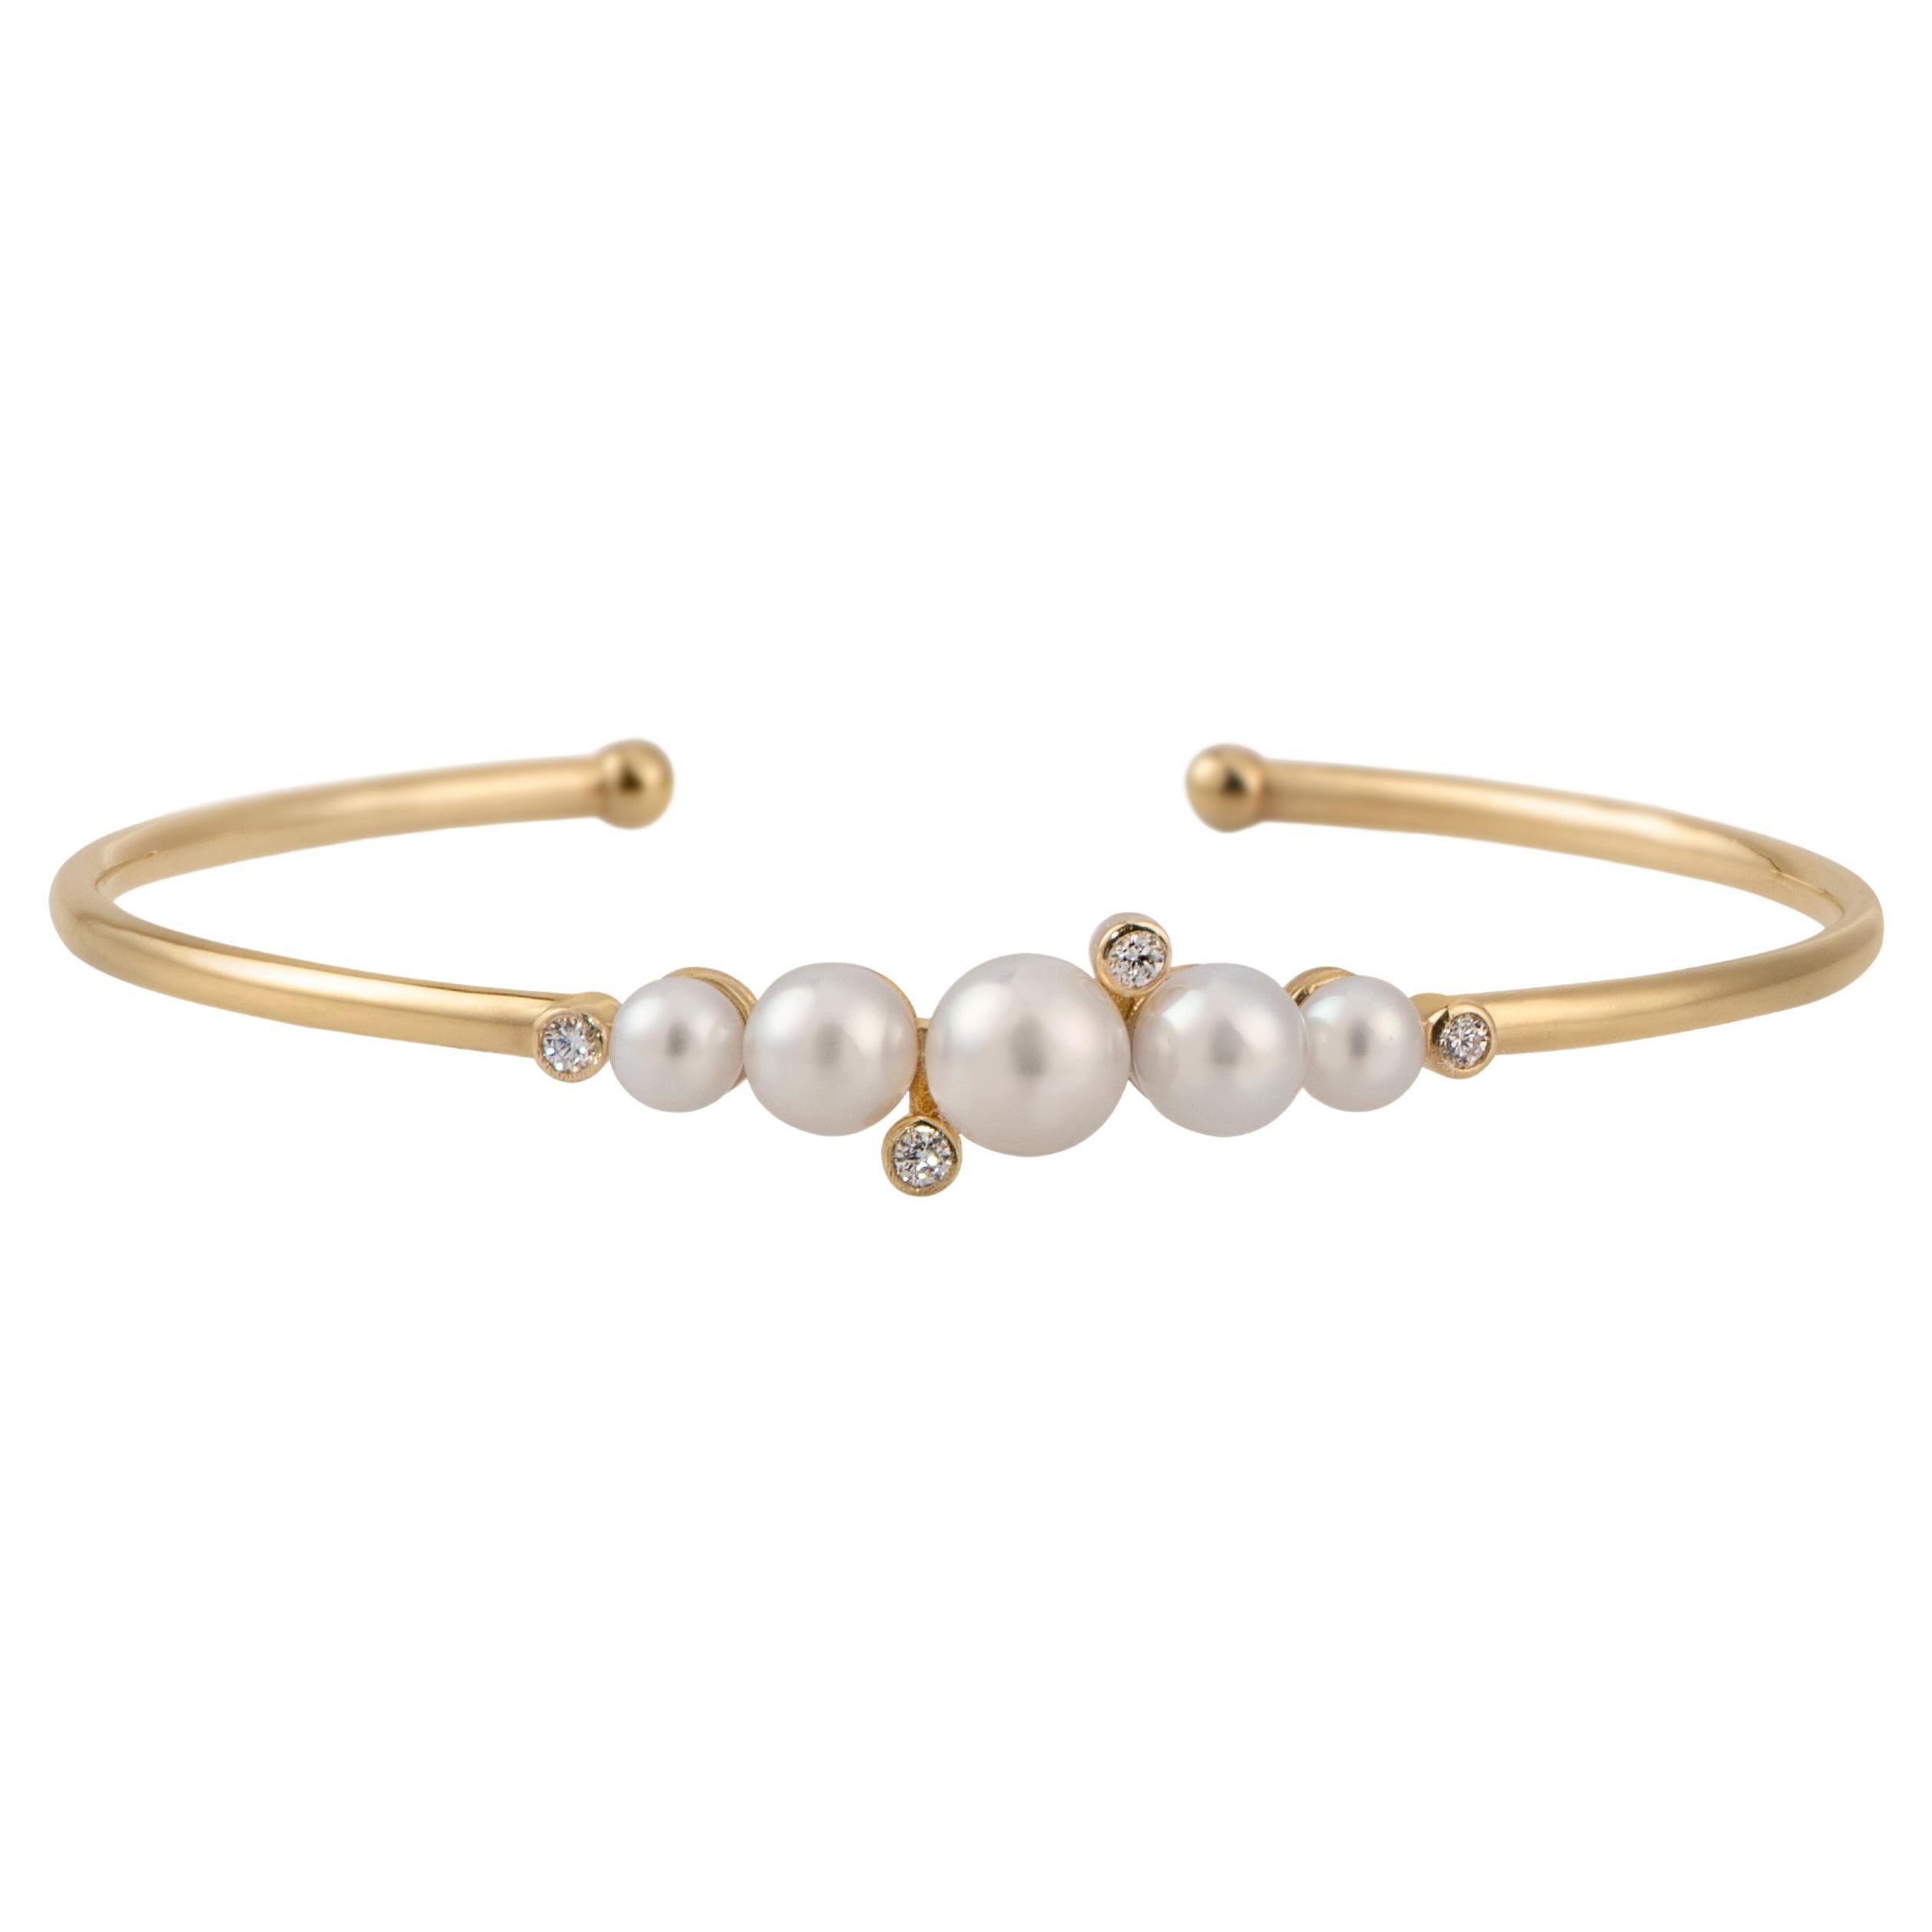 Cuff bracelet with pearls and diamonds in 18K Gold